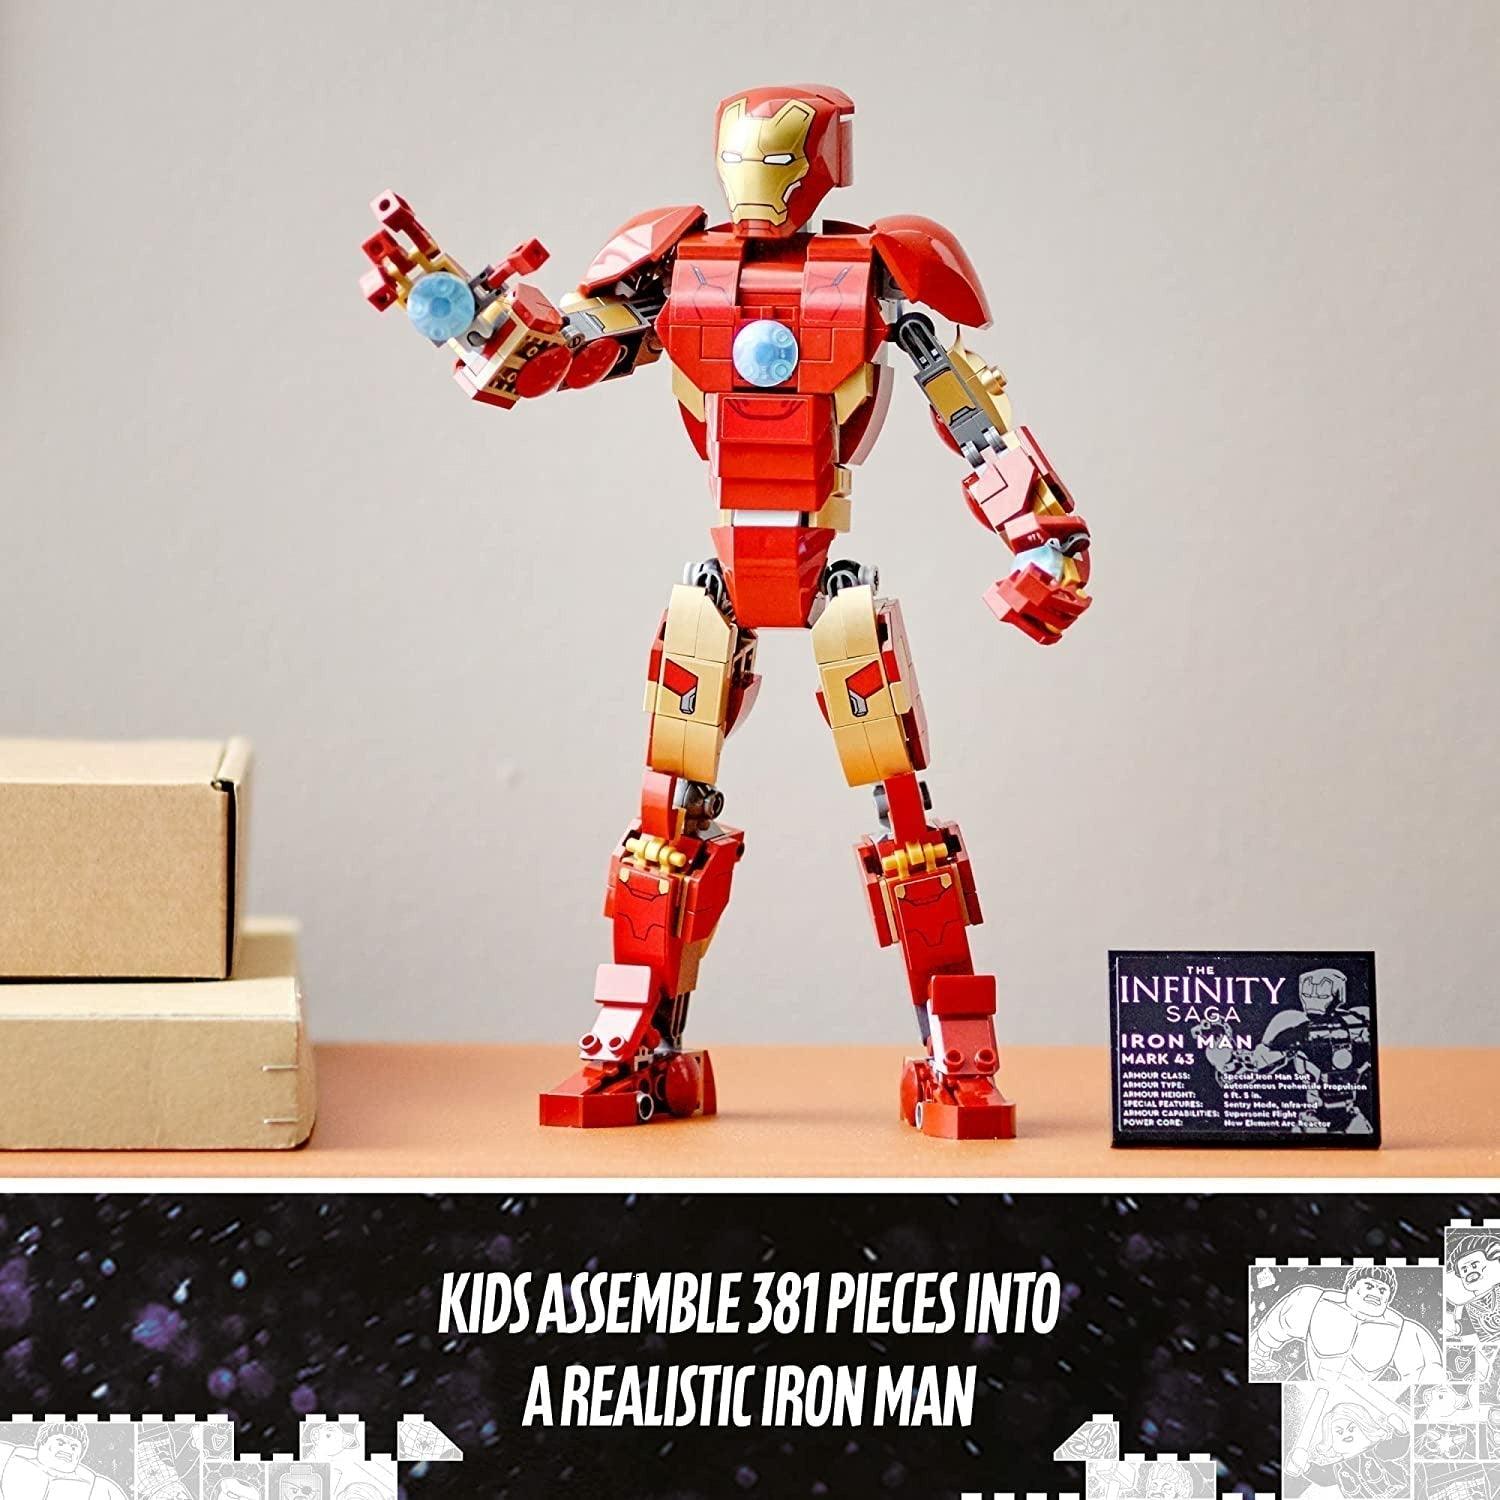 LEGO 76206 Marvel Iron Man Figure Realistic Model for Play & Display Based on Iron Man from Marvel Studios’ Avengers (381 Pieces) - BumbleToys - 8+ Years, 8-13 Years, Action Figures, Avengers, Boys, Figures, Iron man, LEGO, Marvel, OXE, Pre-Order